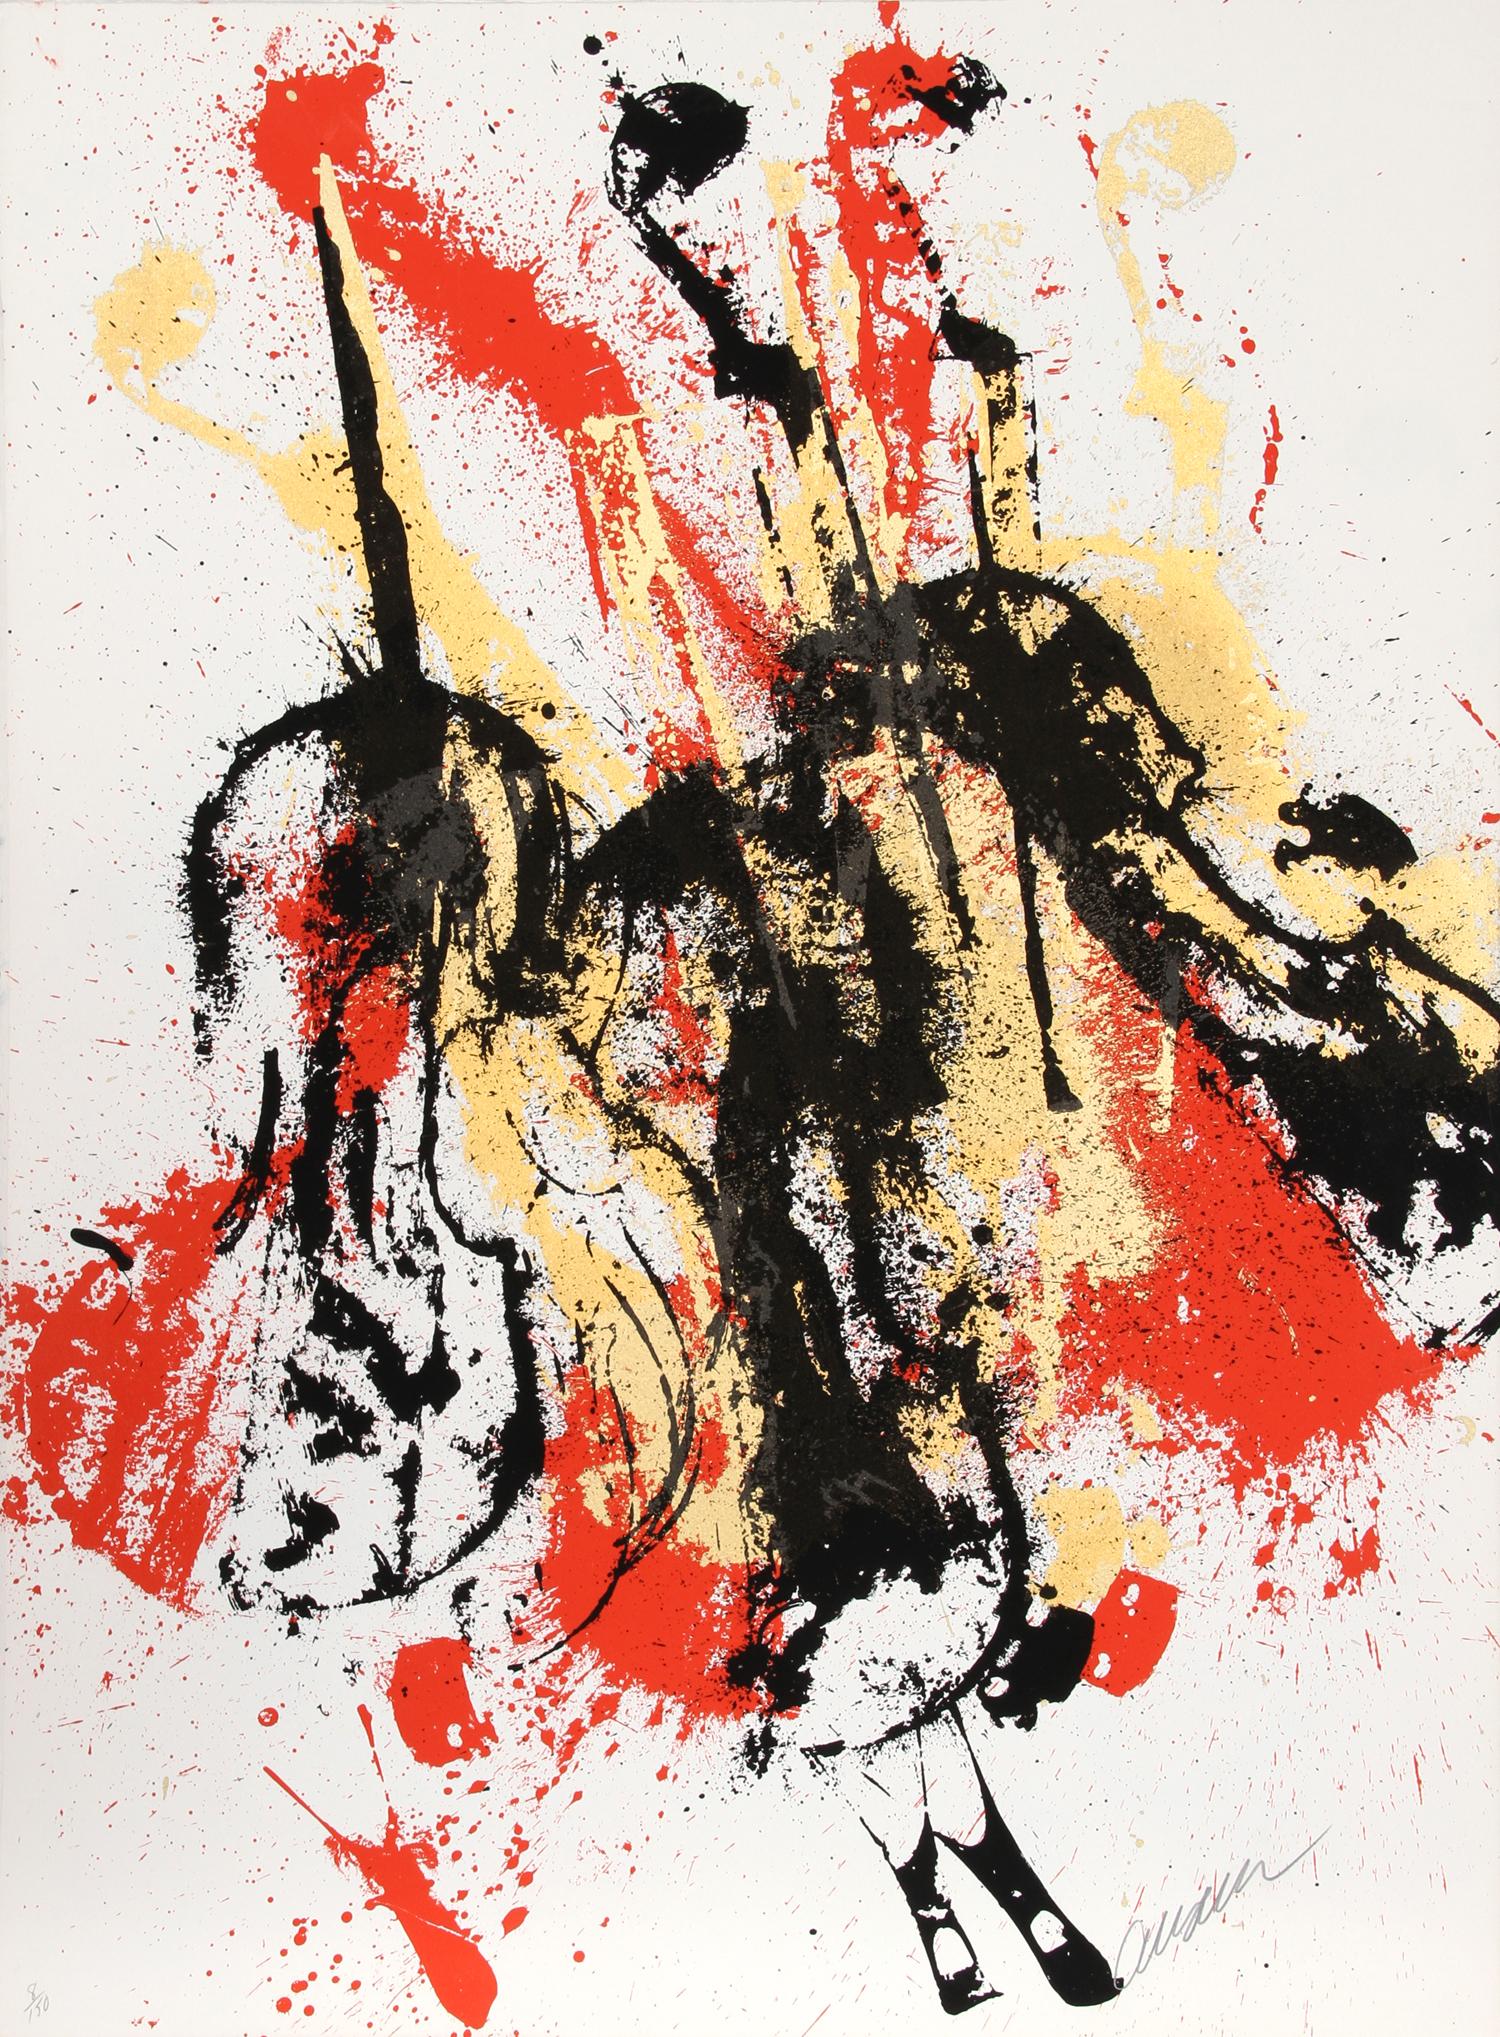 This print of a violin replicated several times in black and red across the composition is indicative of Arman's classic technique of recomposition. Transferring the image across the picture plane several times in two colors, the artist creates a